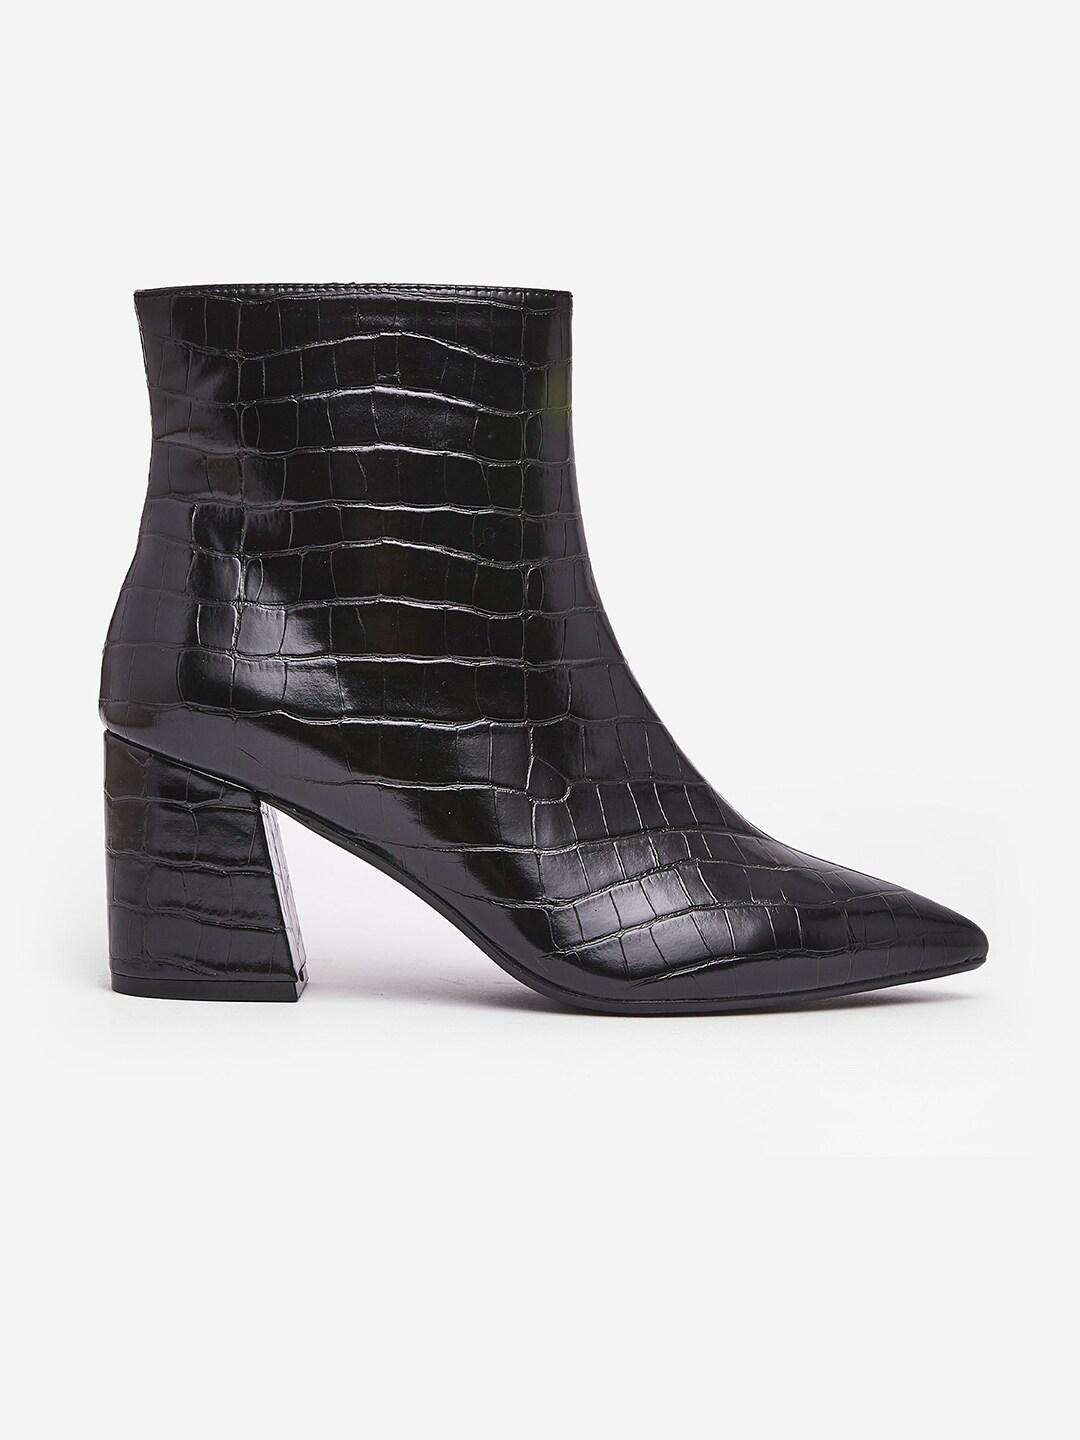 DOROTHY PERKINS Women Black Croc Textured Wide Fit Mid-Top Heeled Boots Price in India